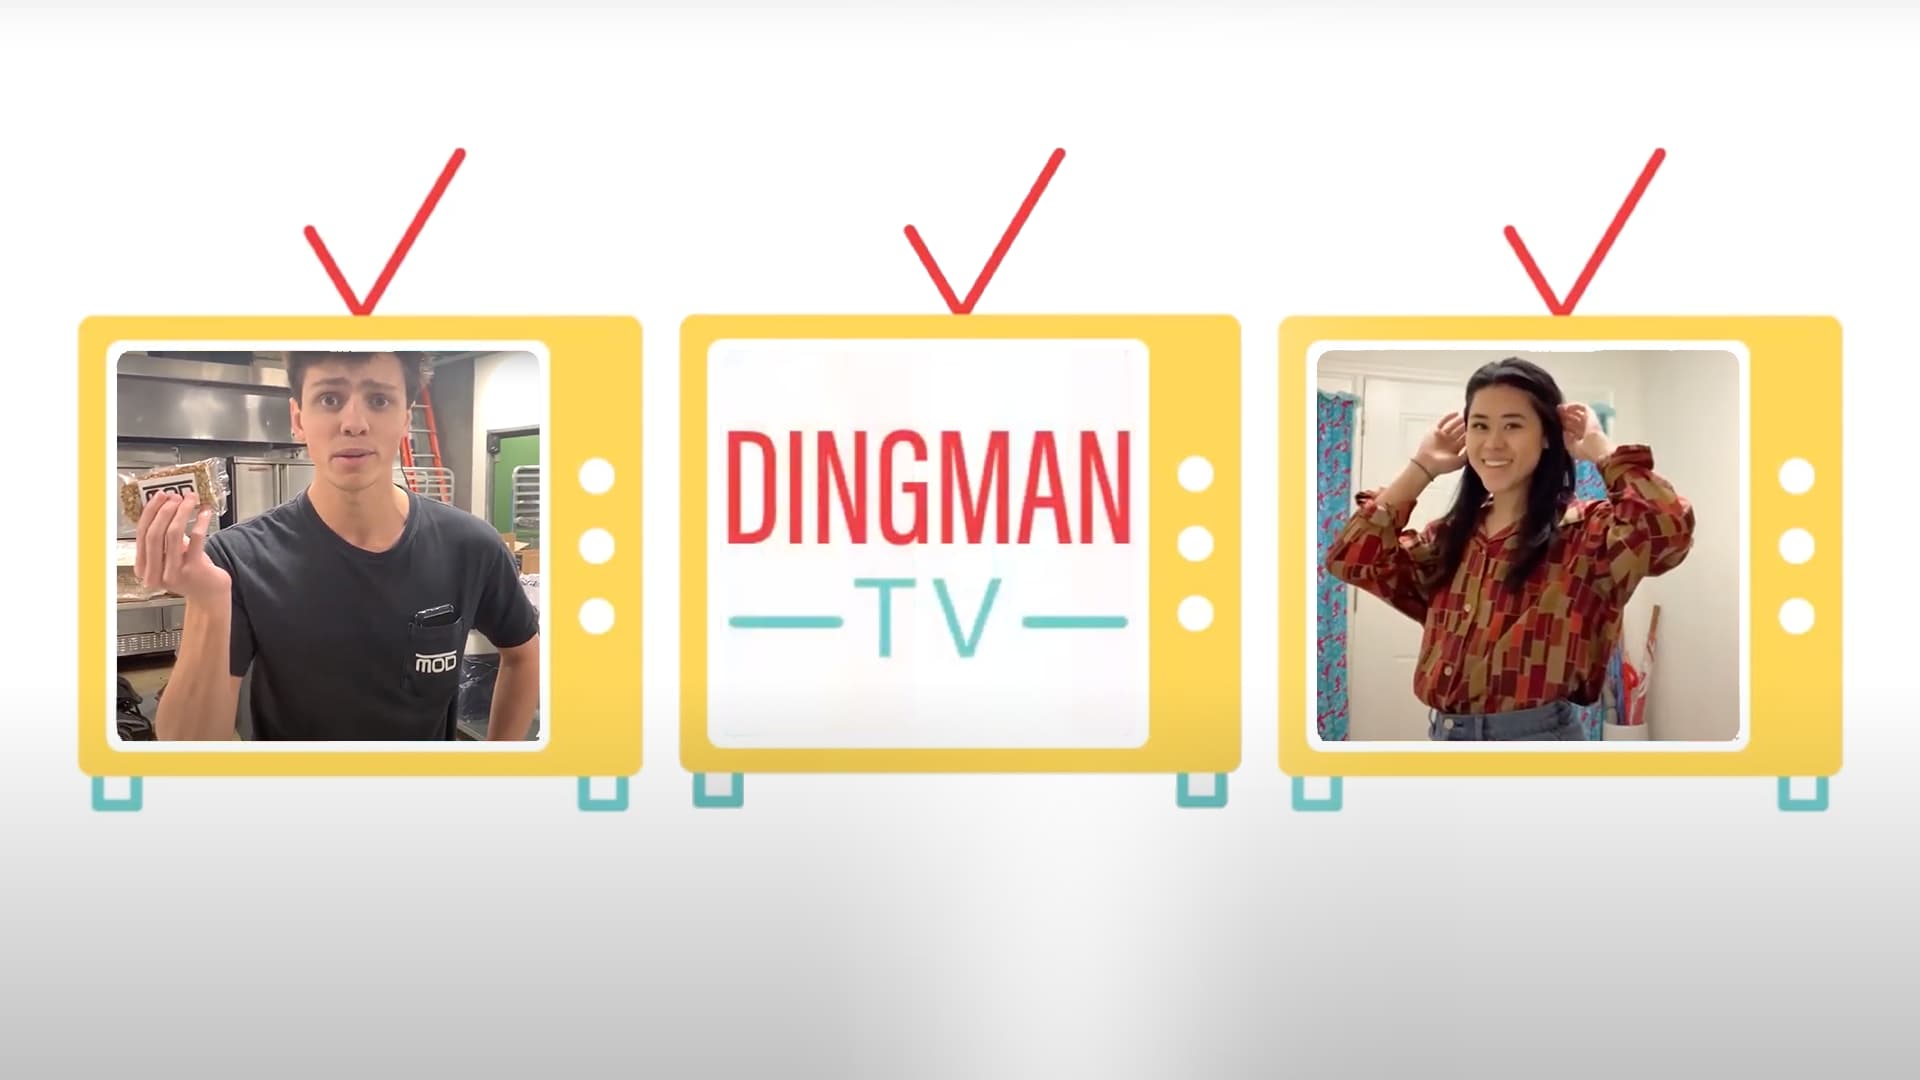 Three yellow TV sets, two showing infomercials and one with the Dingman TV logo